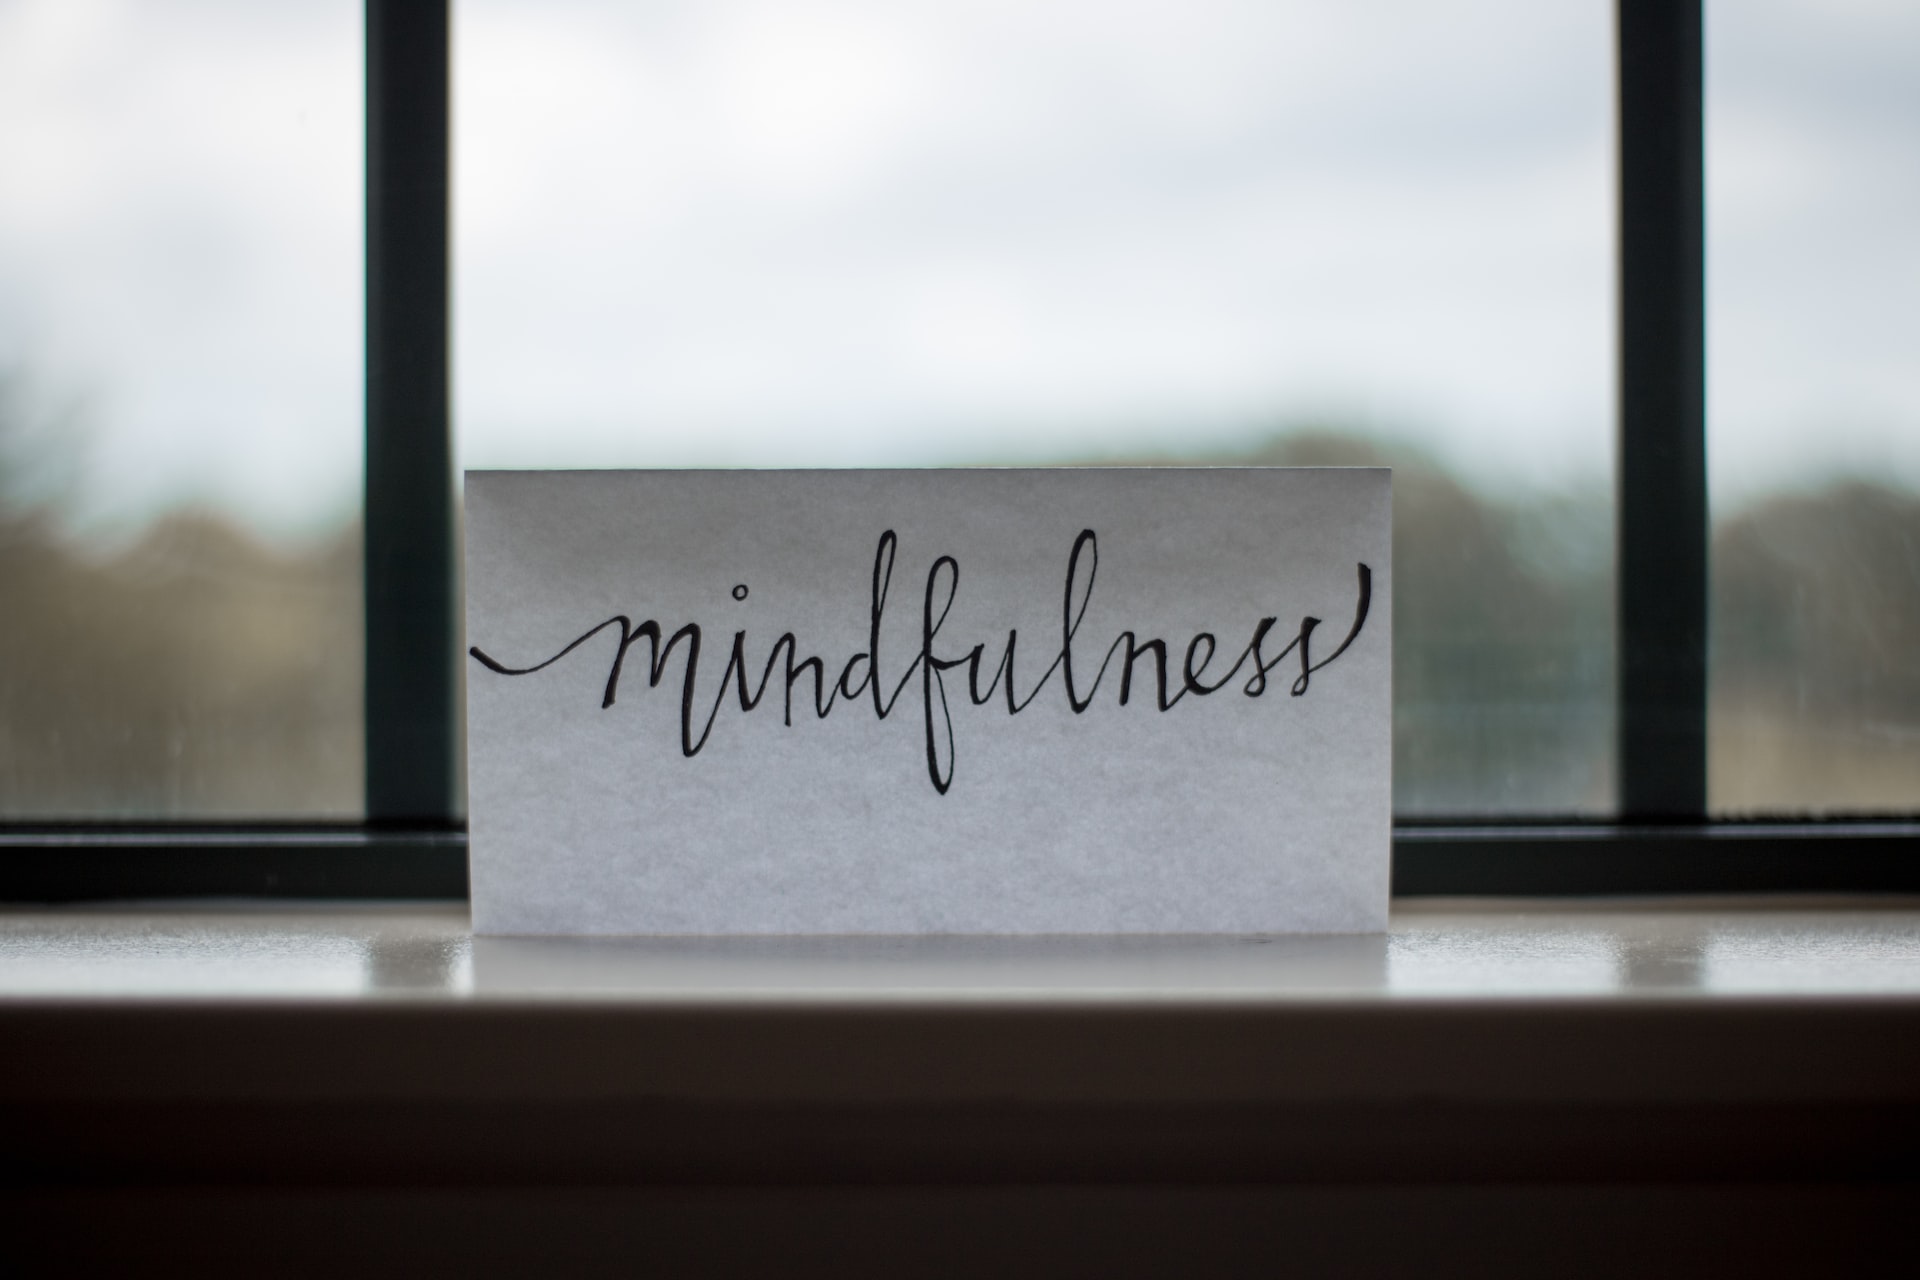 Mindfulness and Self-awareness: 12 Thought-provoking Quotes